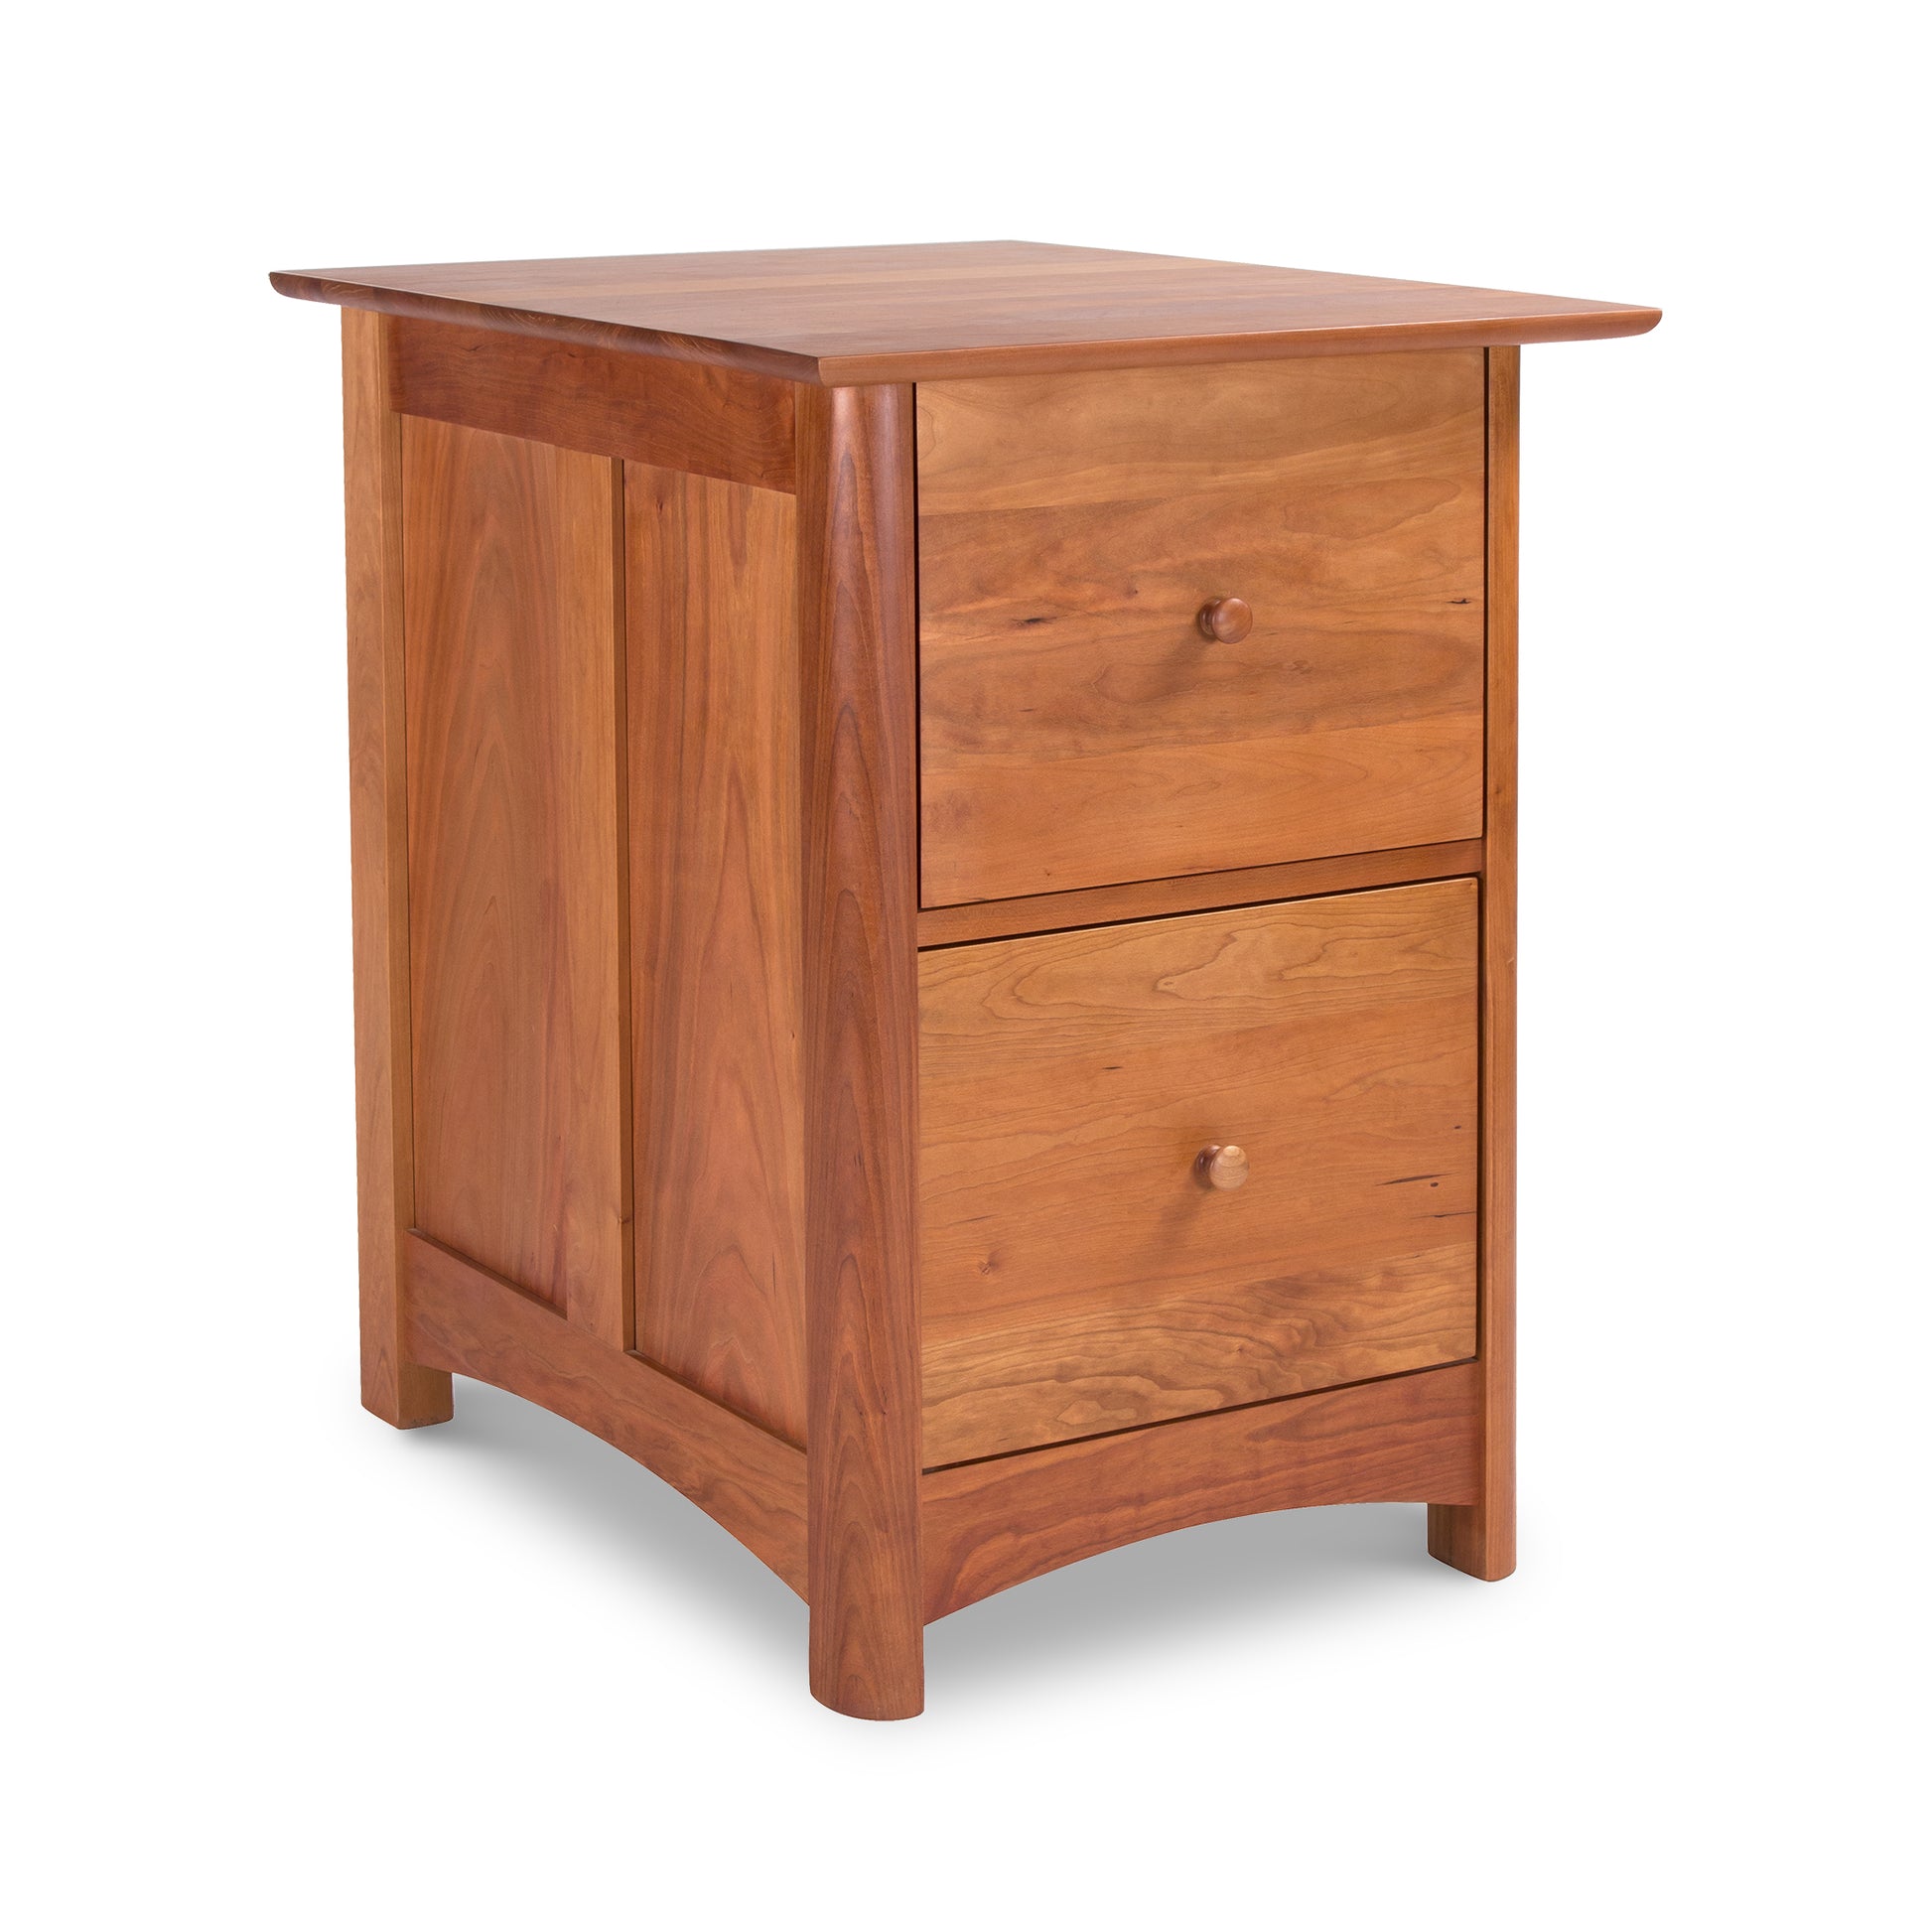 A Heartwood Shaker 2-Drawer Vertical File Cabinet with two drawers, manufactured by Vermont Furniture Designs.